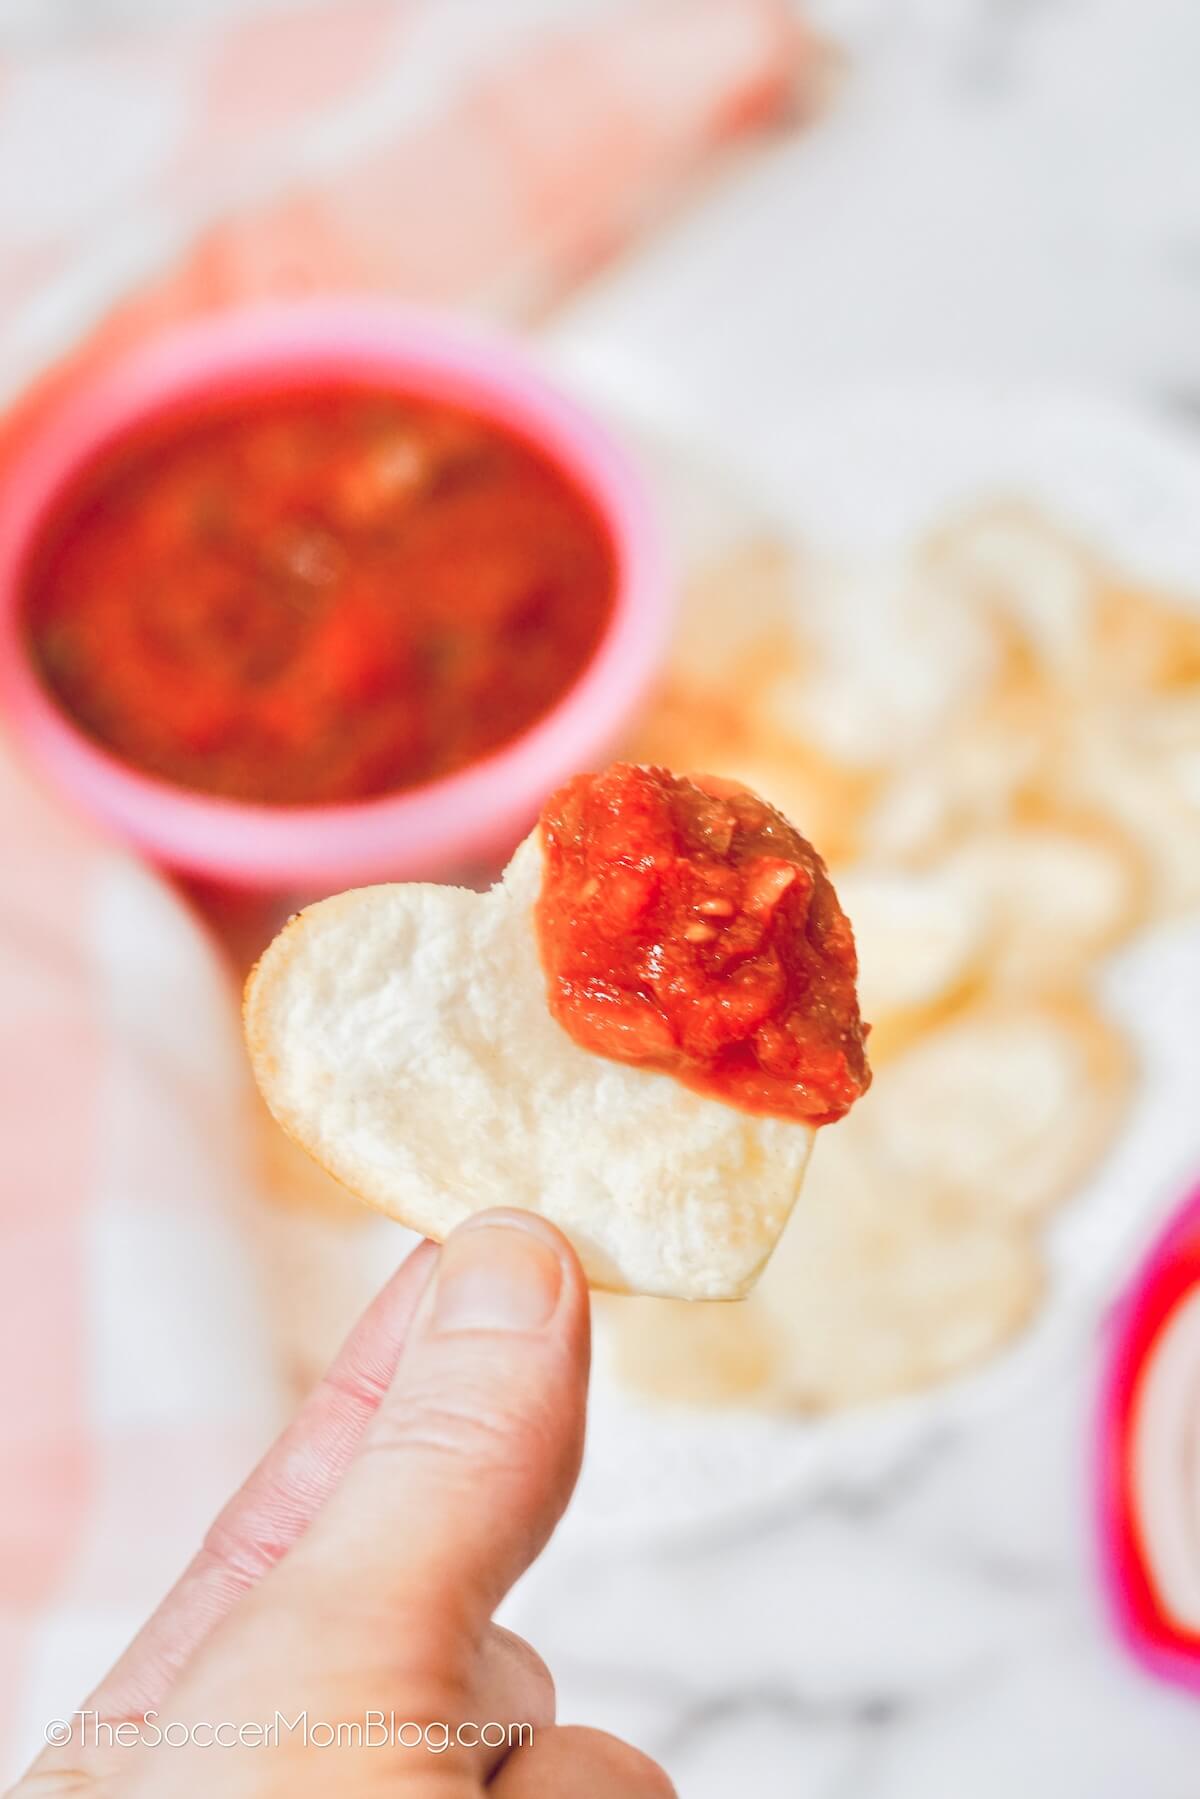 holding up a heart shaped tortilla chip, dipped in salsa.